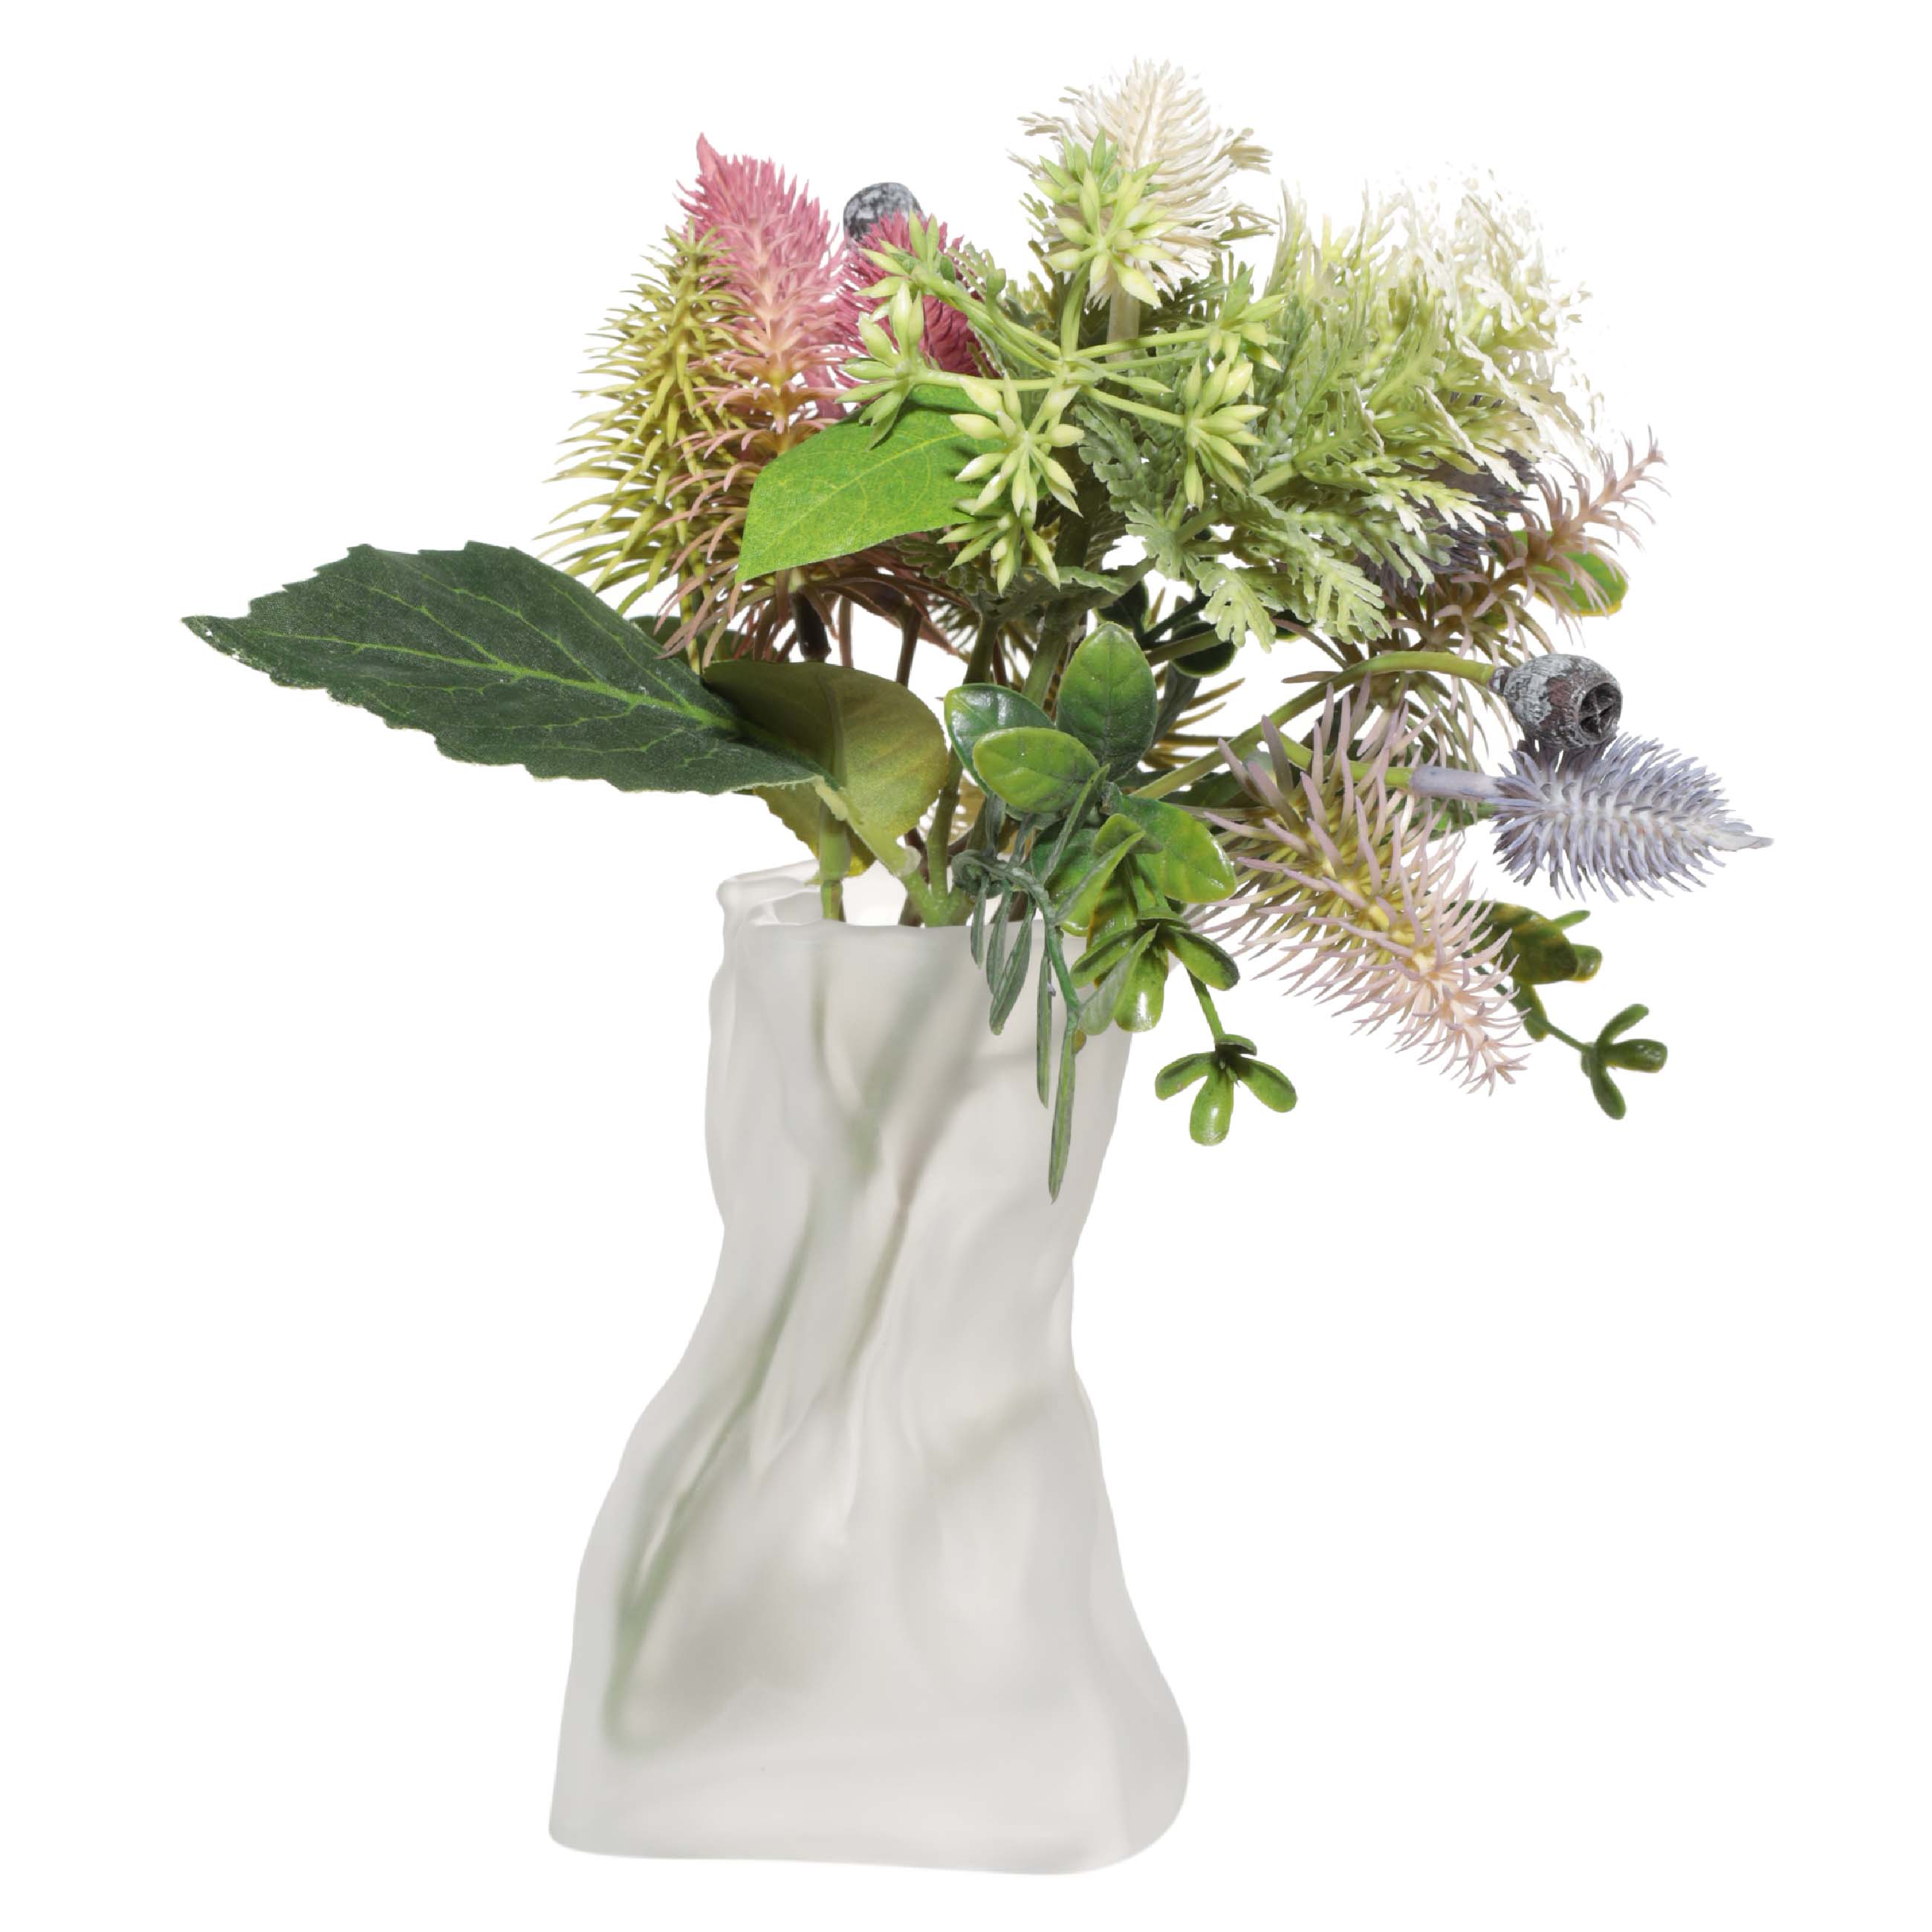 Flower vase, 14 cm, Glass, frosted white, Crumpled effect, Crumple изображение № 3